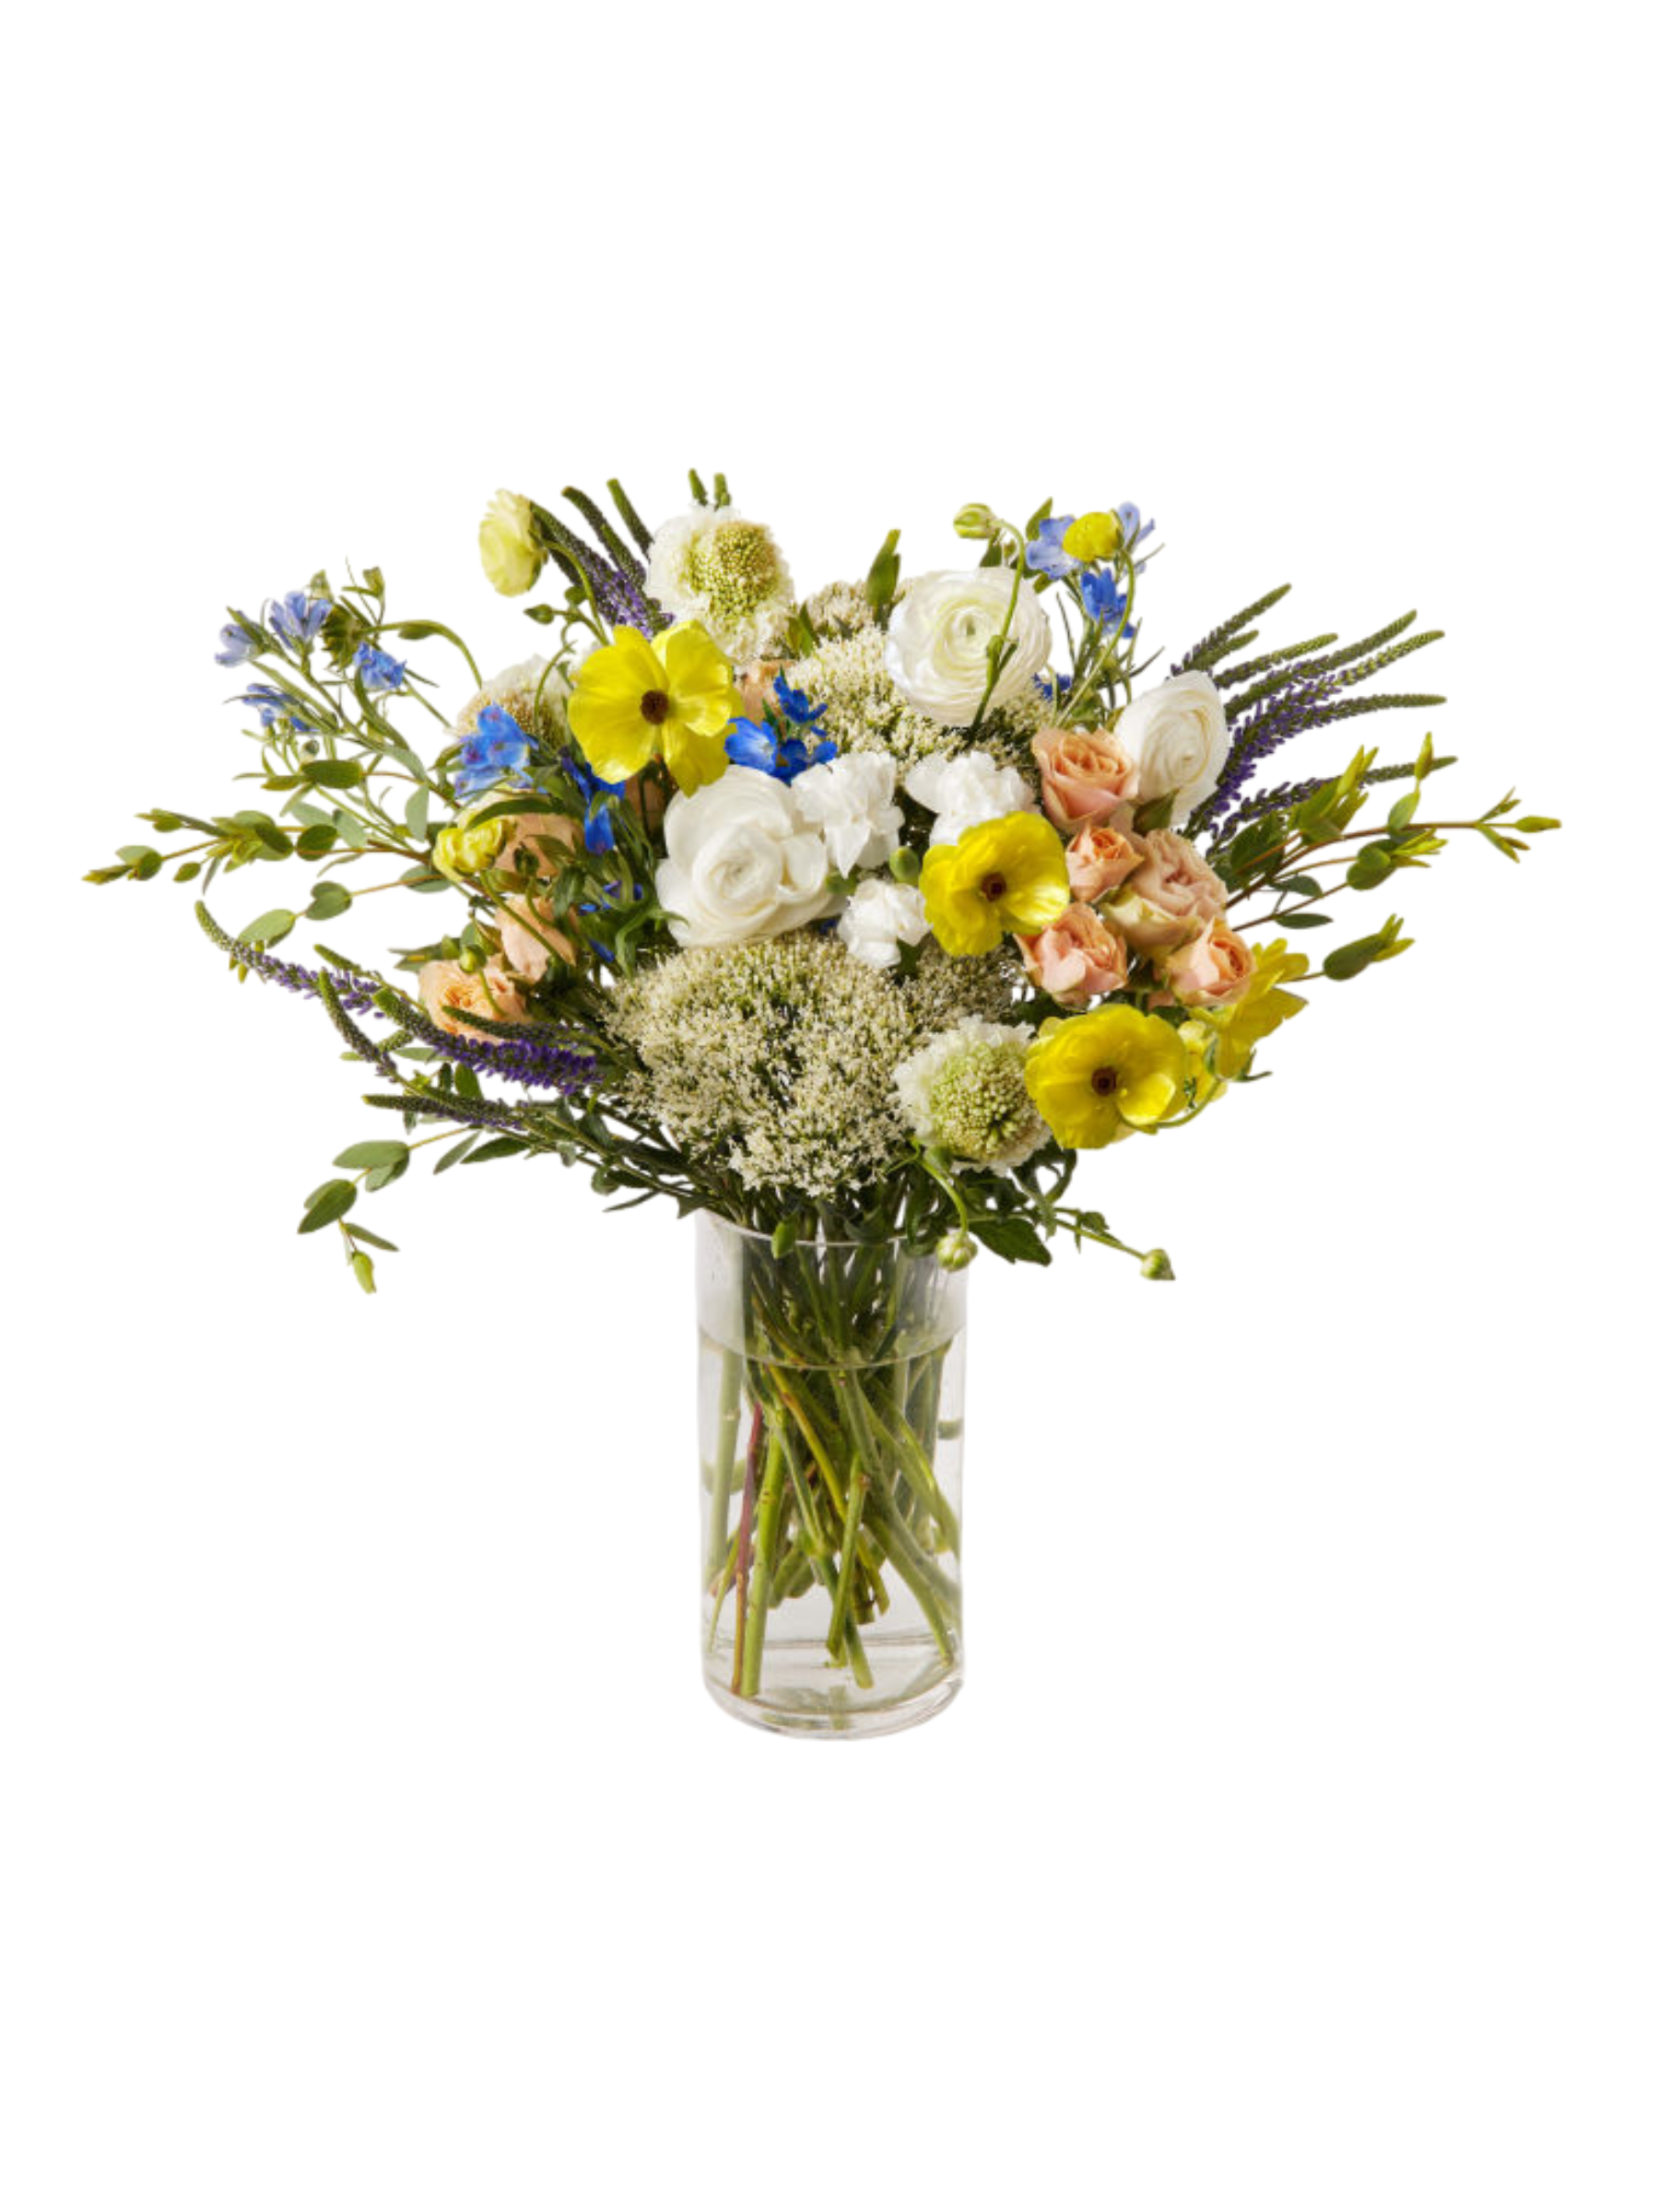 What better way to say congrats than with a fresh bouquet of flowers? If you're not feeling this bright-colored set, Urbanstems has an endless selection to choose from, and some <a href="https://cna.st/affiliate-link/3bJgWNyAscQZQJFCE8ibPq9Rstp1Mk7FRm56L7kUUQHZE6EJn1AVWyyjrfxEv5BVdscwMyJQ7odU8iK1sEwvT5otkcsPQDjfRGUFF7T44kX4KAr4RGaqCvJAGTBBoJ" rel="sponsored">plants</a> too. $95, Urbanstems. <a href="https://urbanstems.com/products/flowers/the-wildflower/FLRL-B-10094.html">Get it now!</a><p>Sign up for today’s biggest stories, from pop culture to politics.</p><a href="https://www.glamour.com/newsletter/news?sourceCode=msnsend">Sign Up</a>